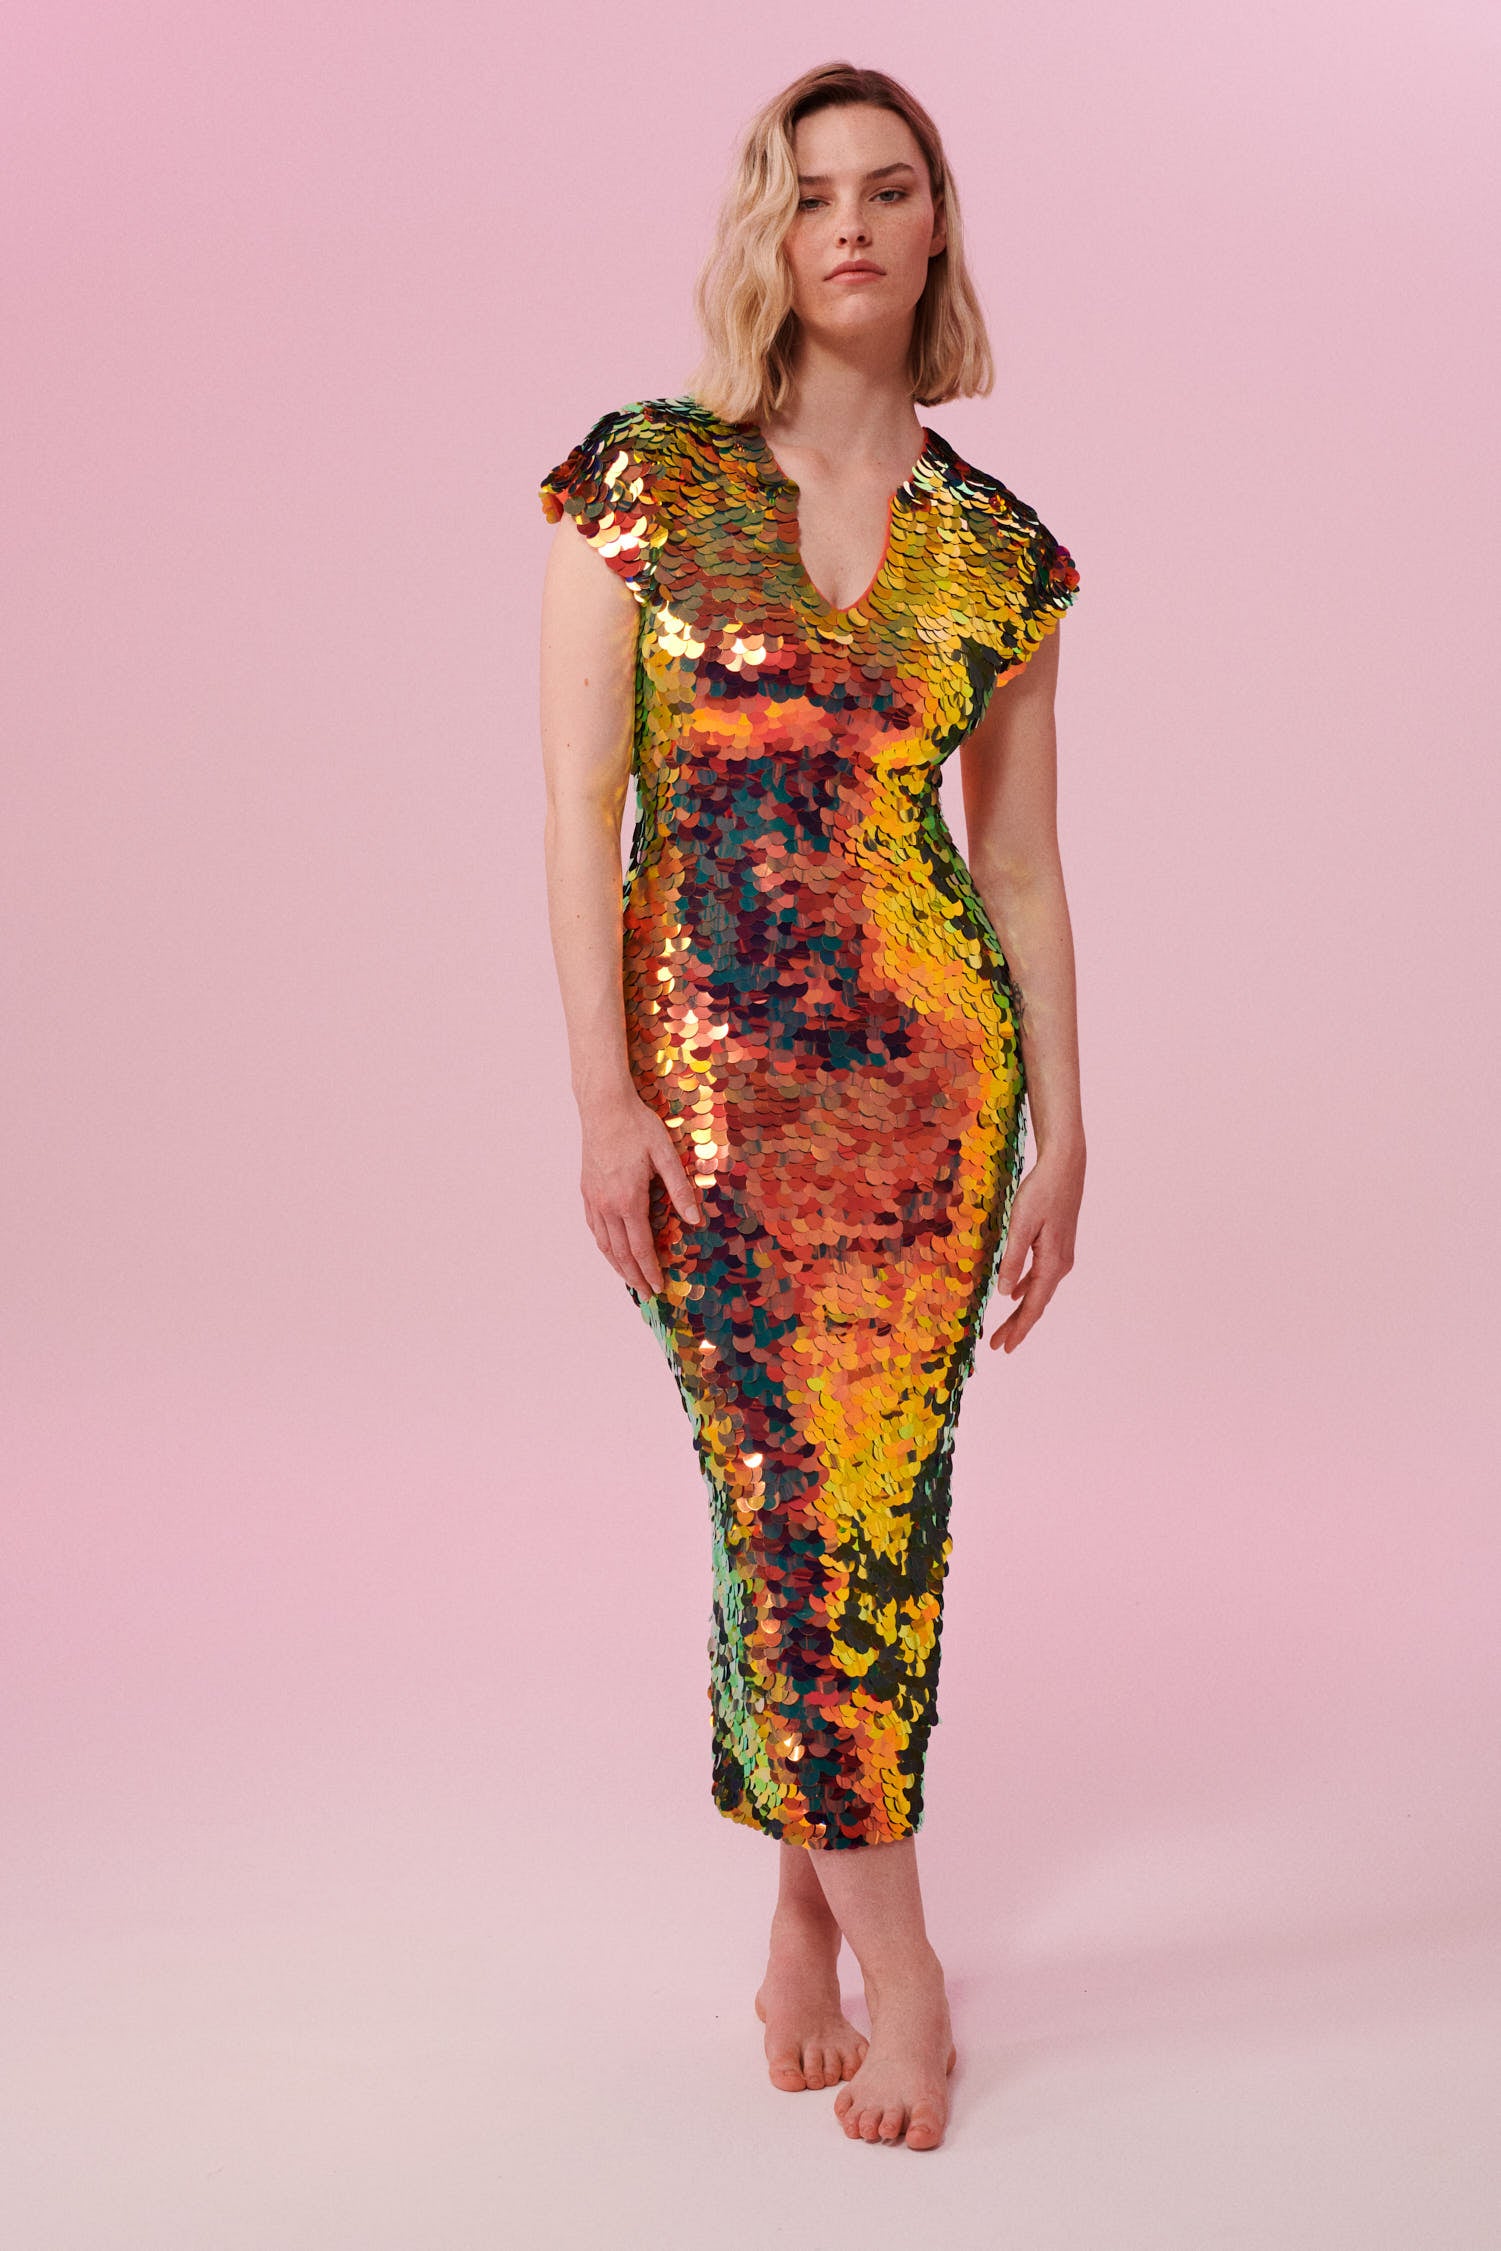 A woman with short blonde hair standing facing the viewer wearing an iridescent golden sequin long dress. A figure hugging  dress down to the ankles with small capped sleeves completely covered in large round holographic Rosa Bloom sequins. The sequins glisten, creating a mix of shimmering colours of burnt orange, yellow, gold and warm red making this sequin dress glow when worn.